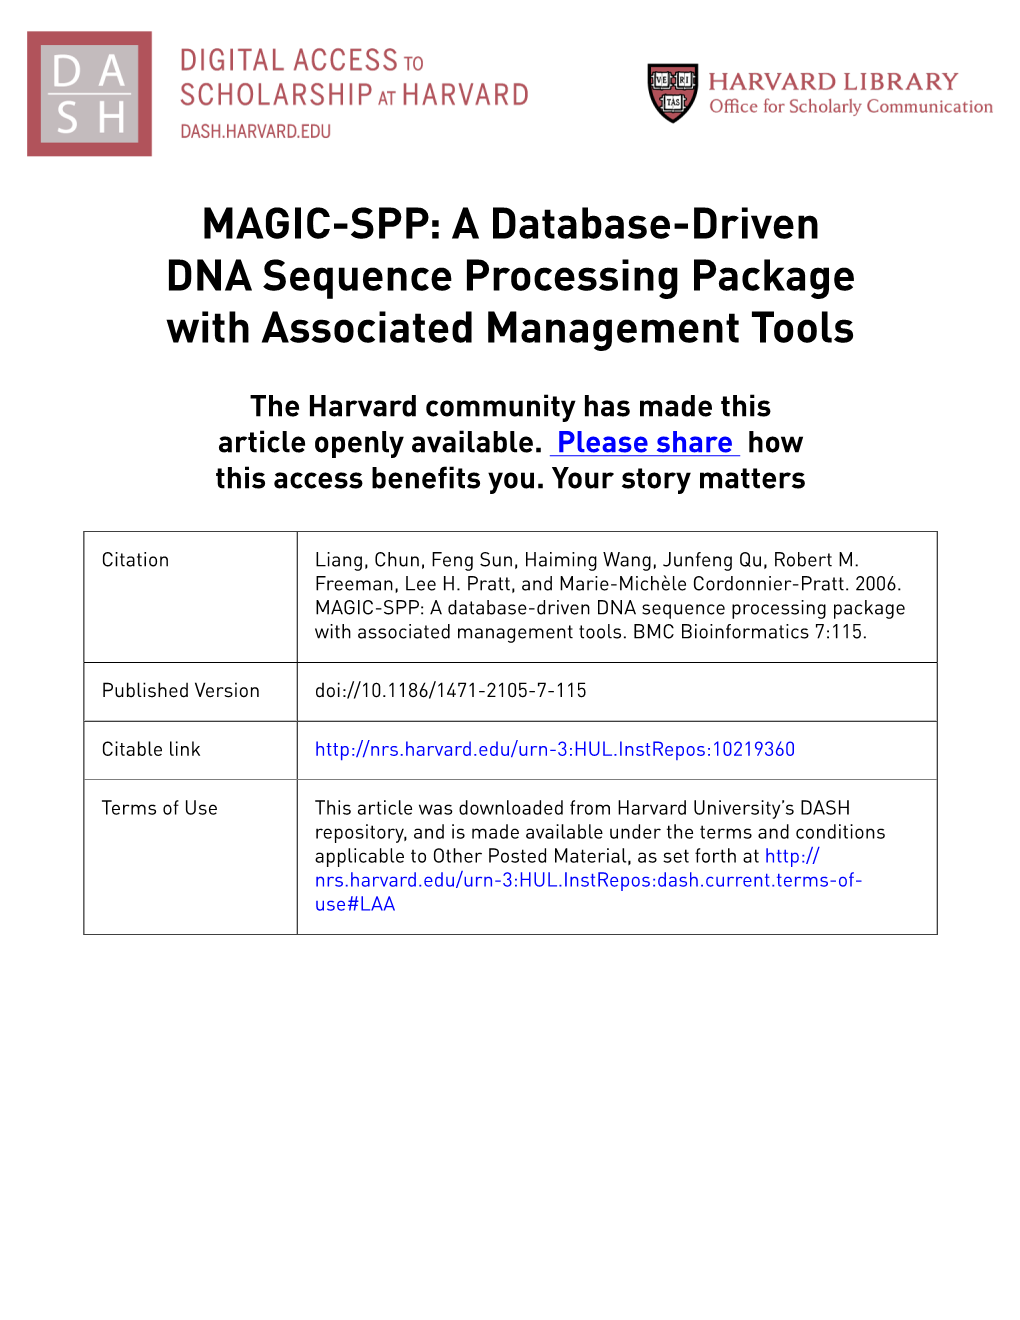 MAGIC-SPP: a Database-Driven DNA Sequence Processing Package with Associated Management Tools